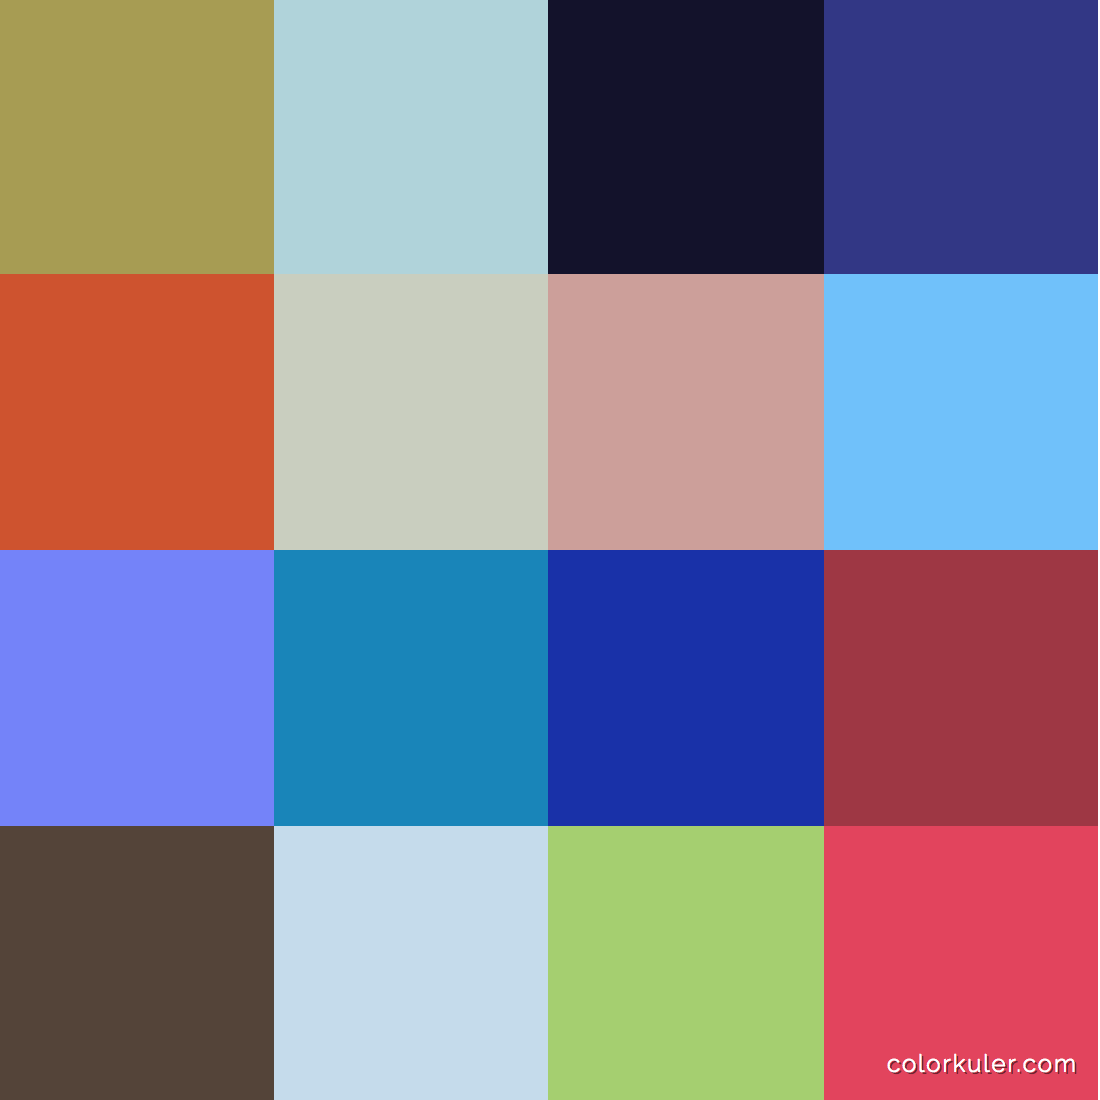 7 Branding Color Palettes Inspired By Summer